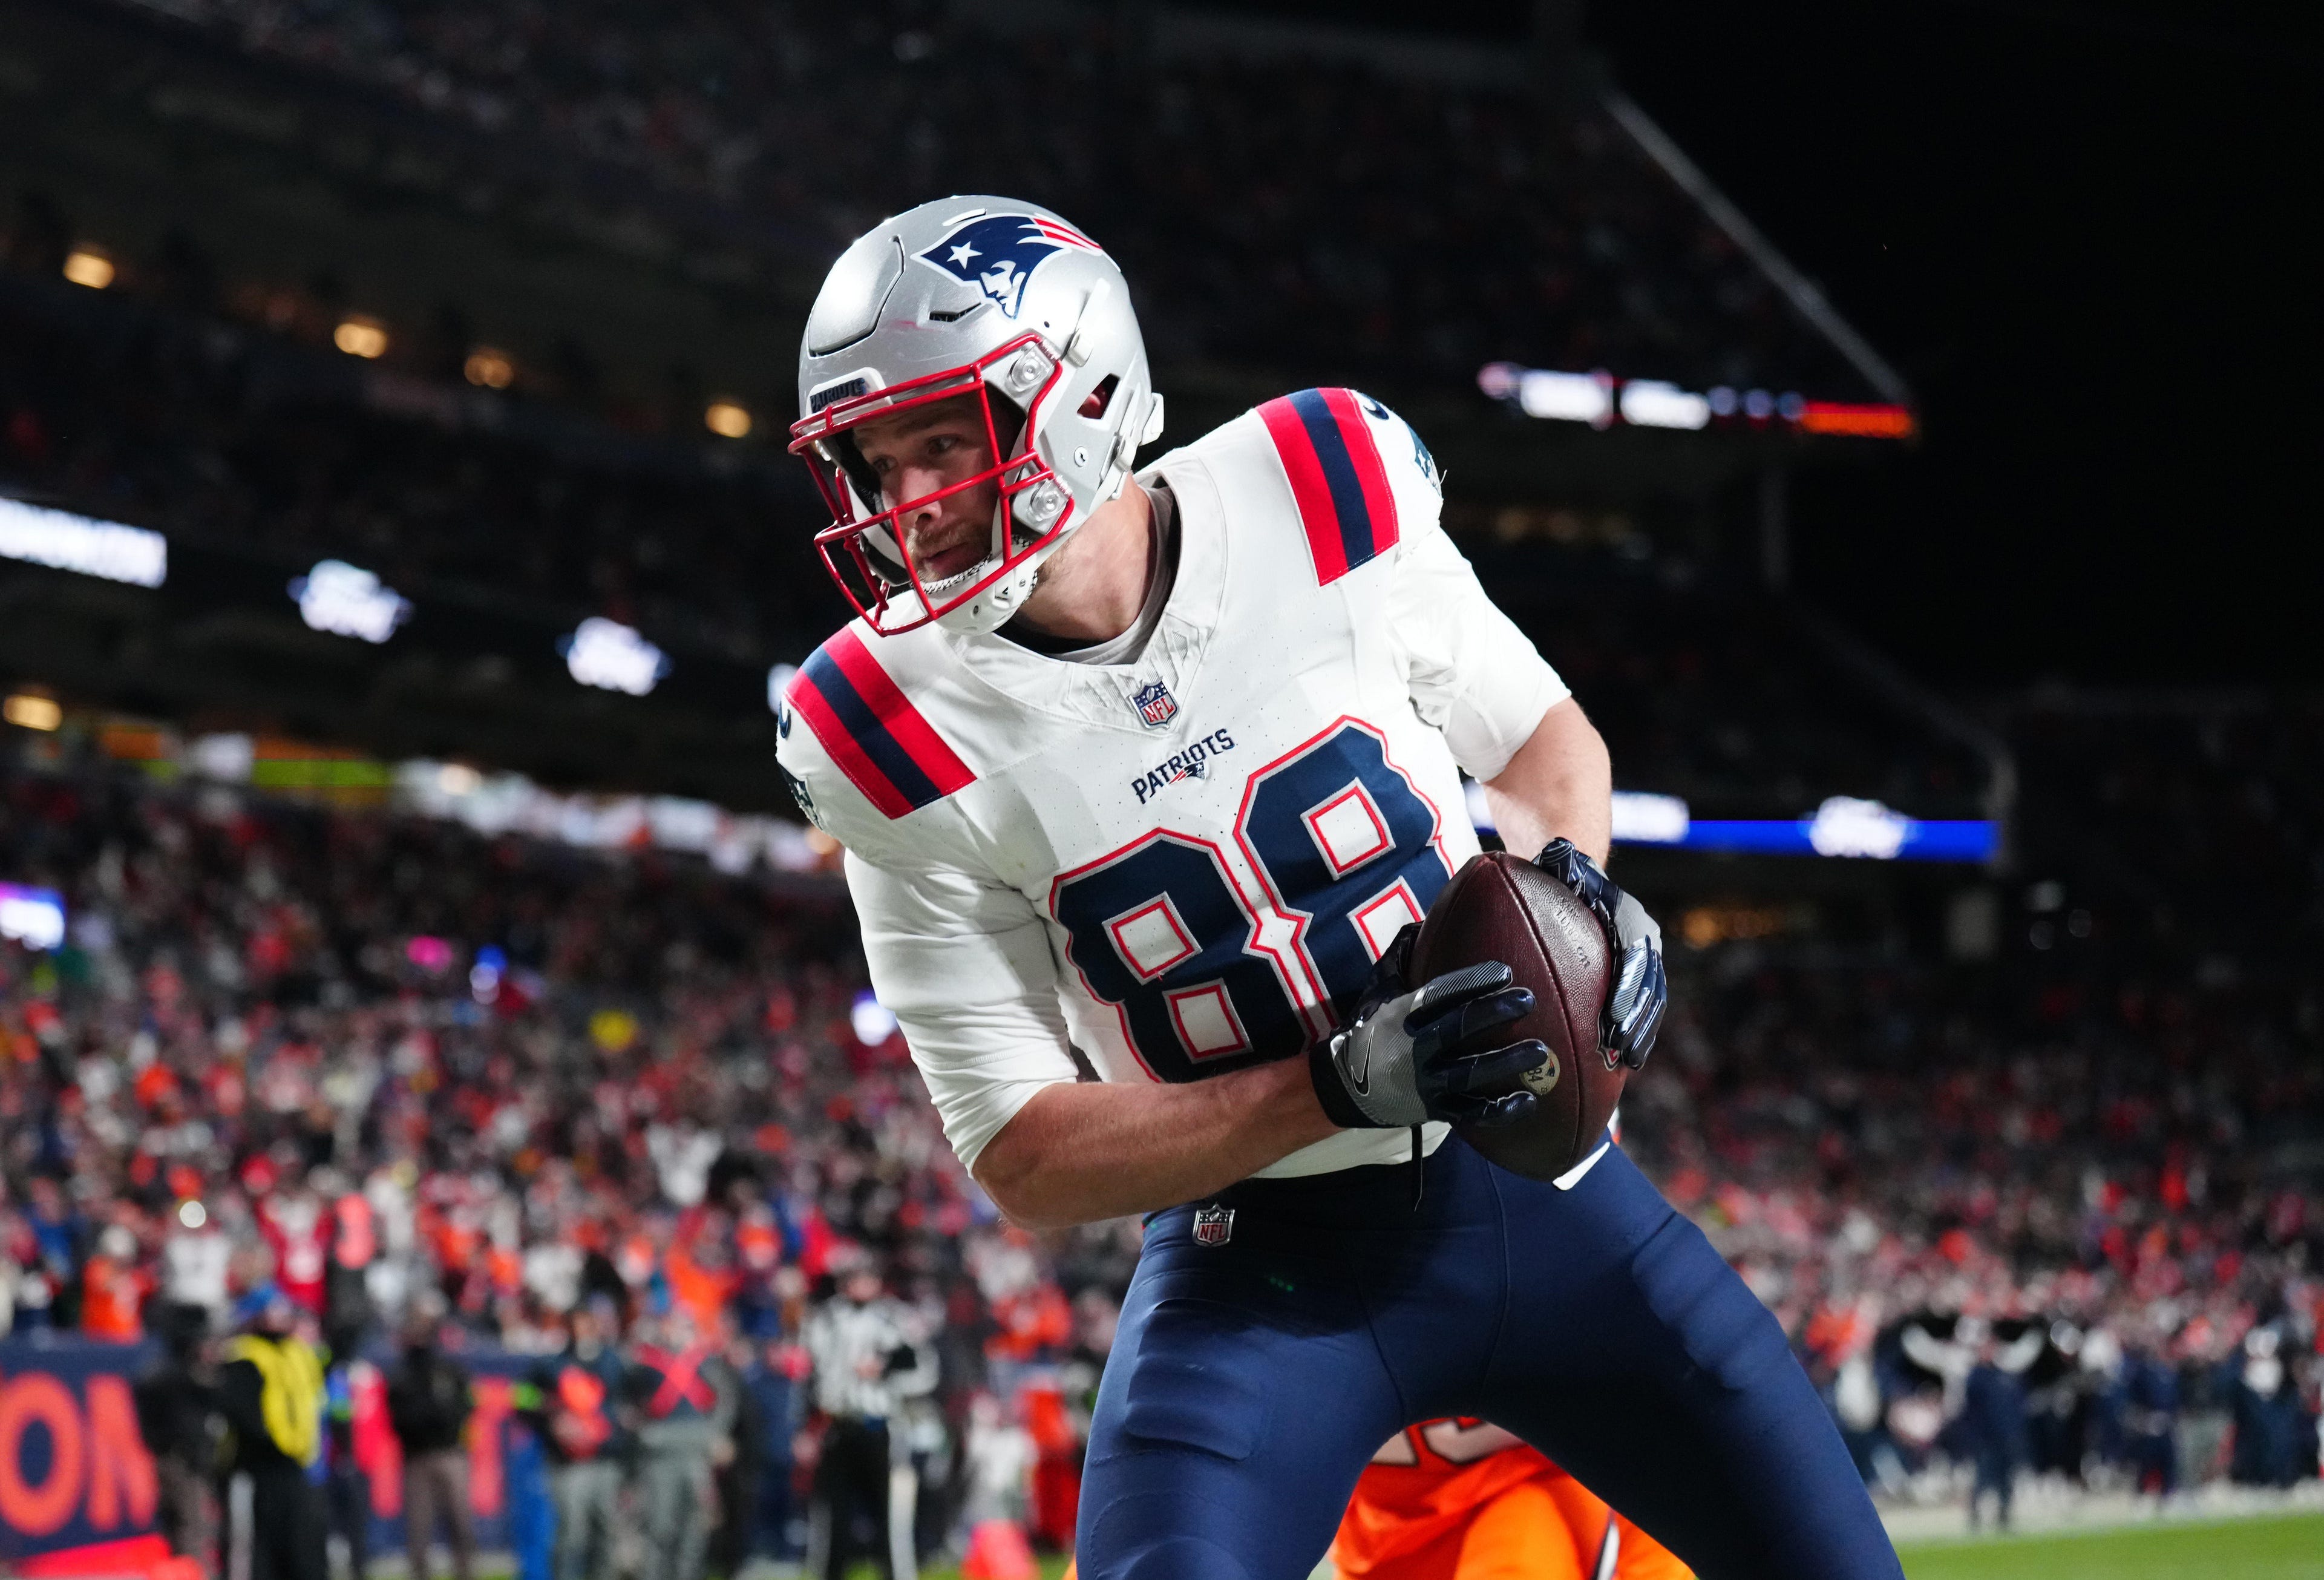 mike gesicki's praise for bengals not a good look for patriots